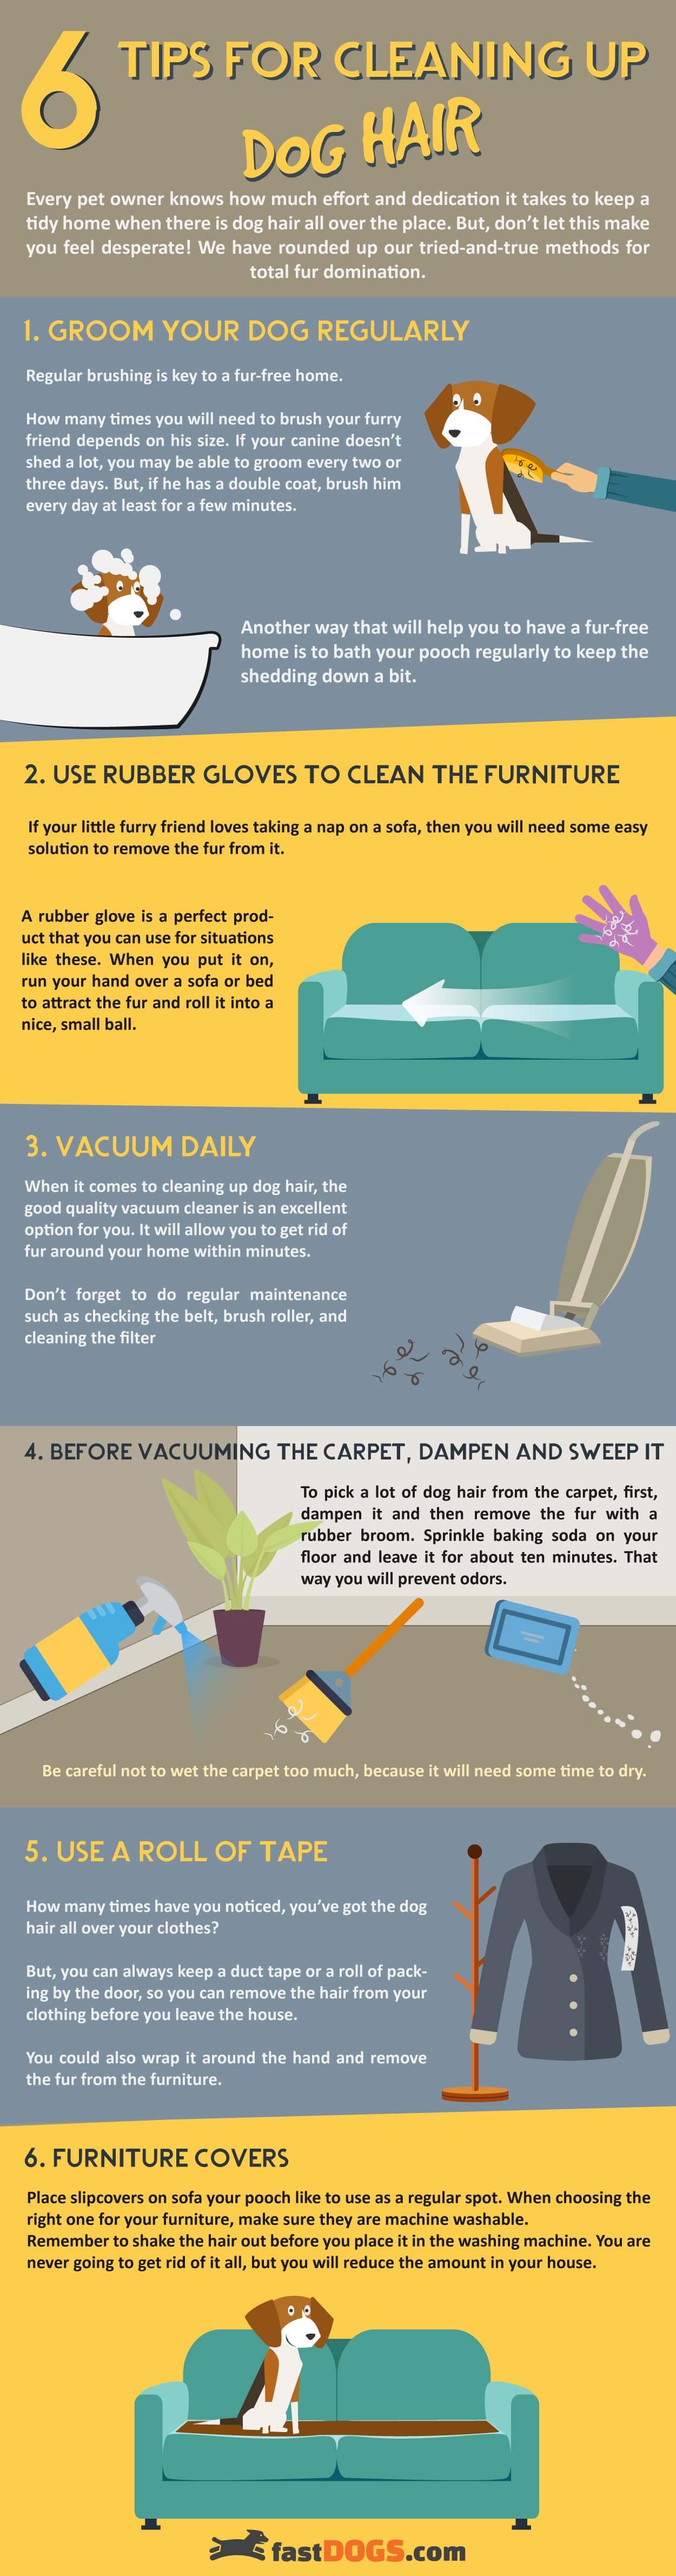 6 Tips for Cleaning Up Dog Hair